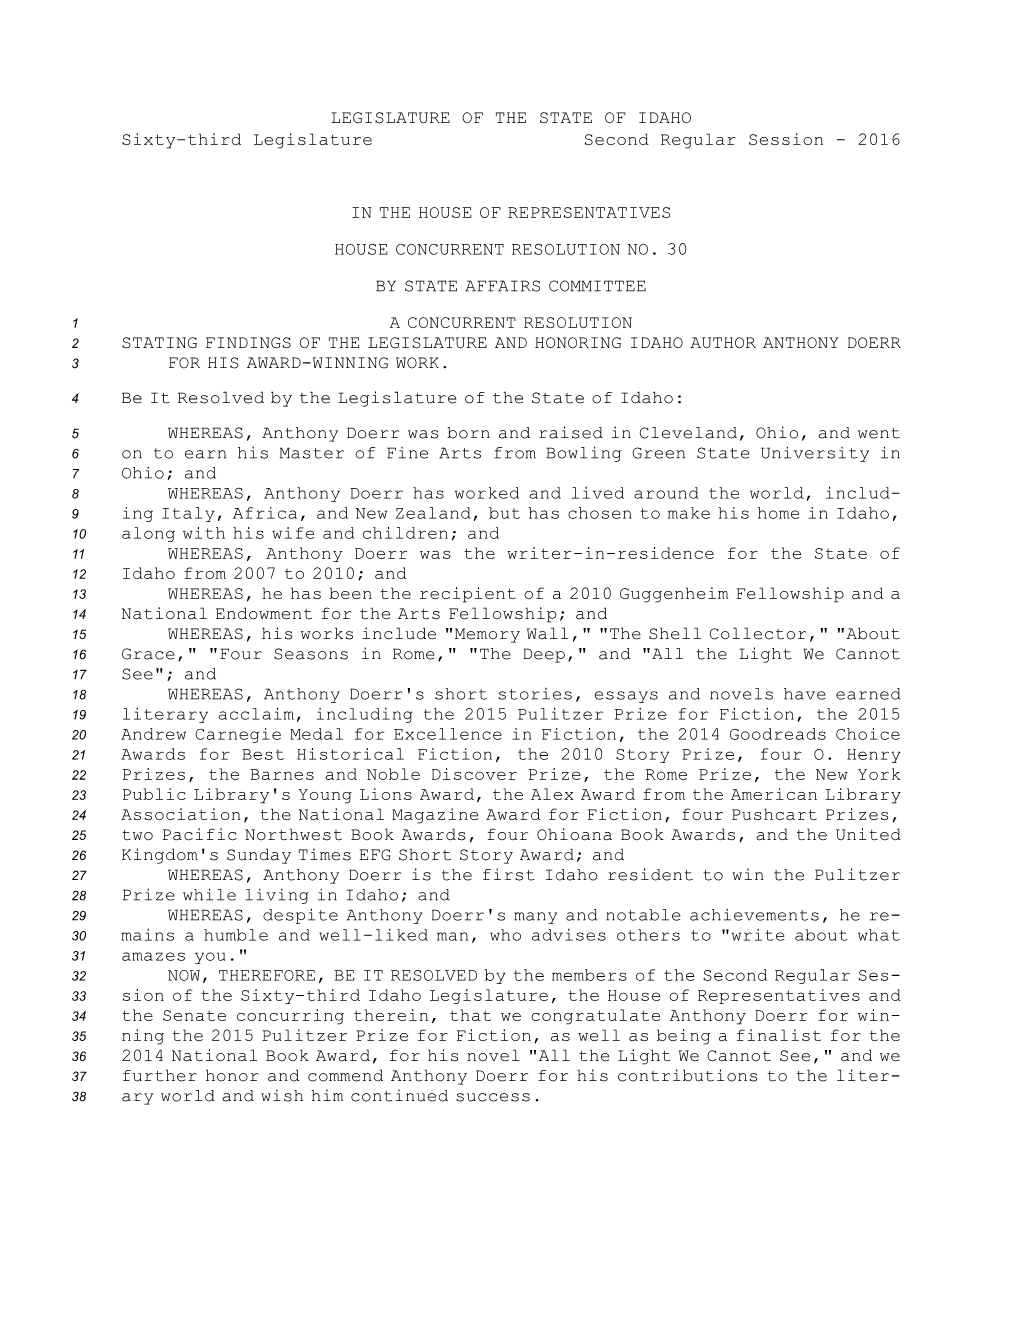 House Concurrent Resolution No.30 (2016